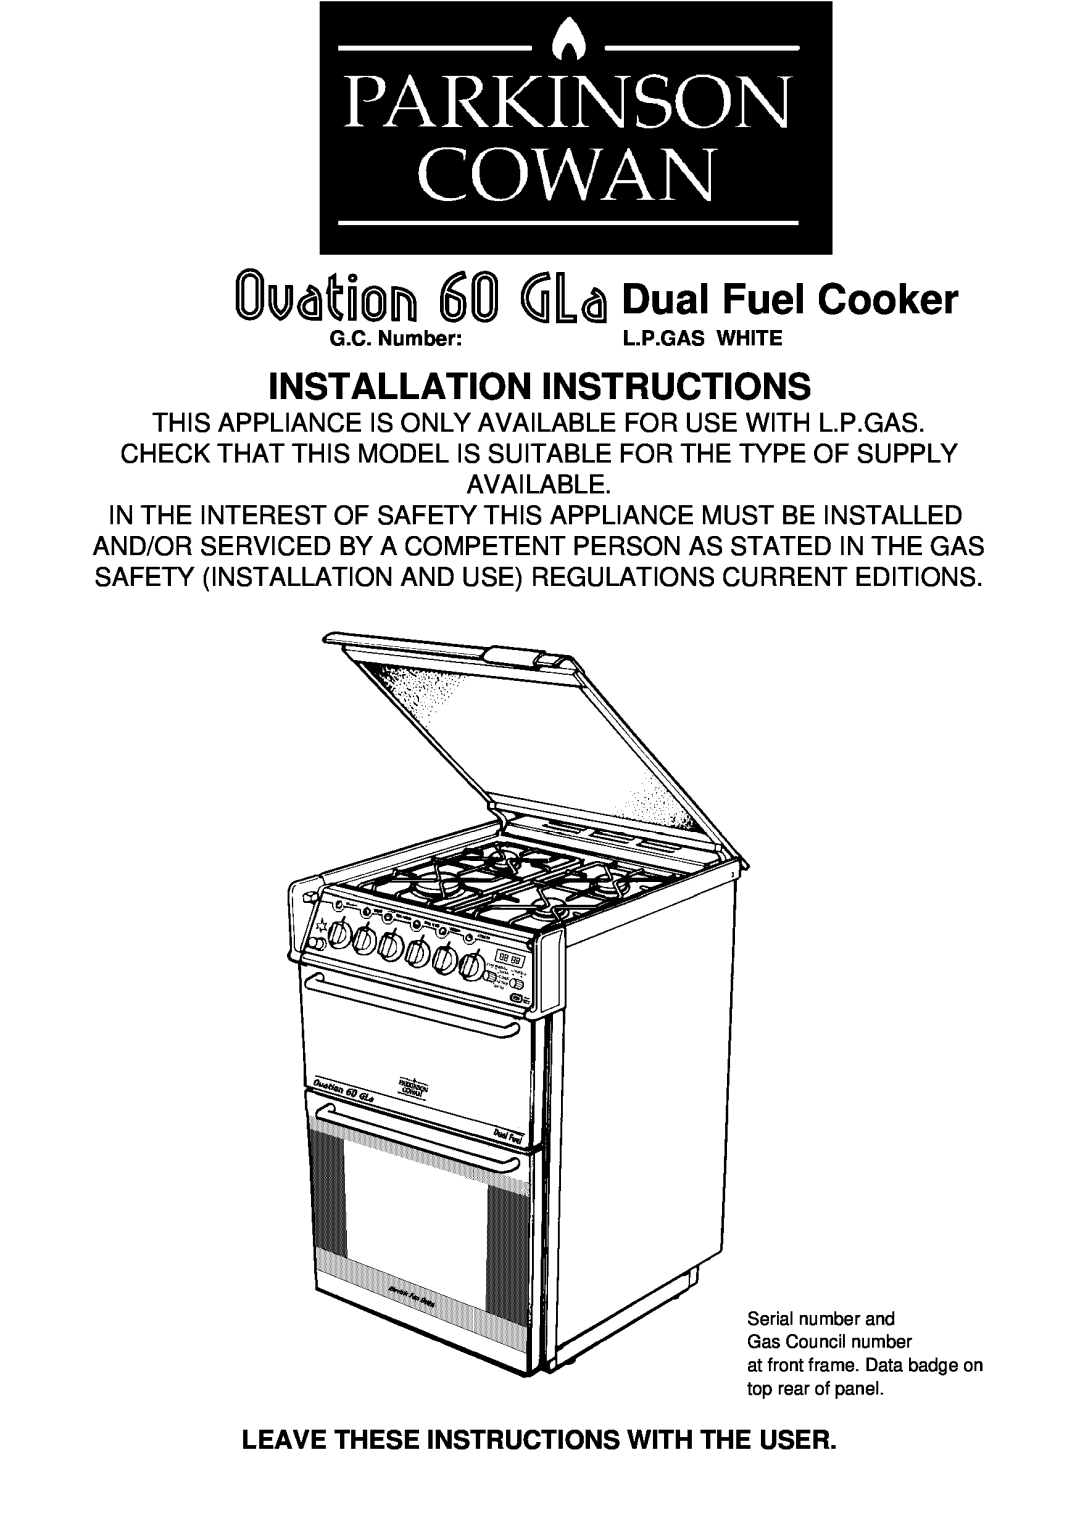 Electrolux 60 GLa manual Dual Fuel Cooker, Leave These Instructions With The User, Installation Instructions 